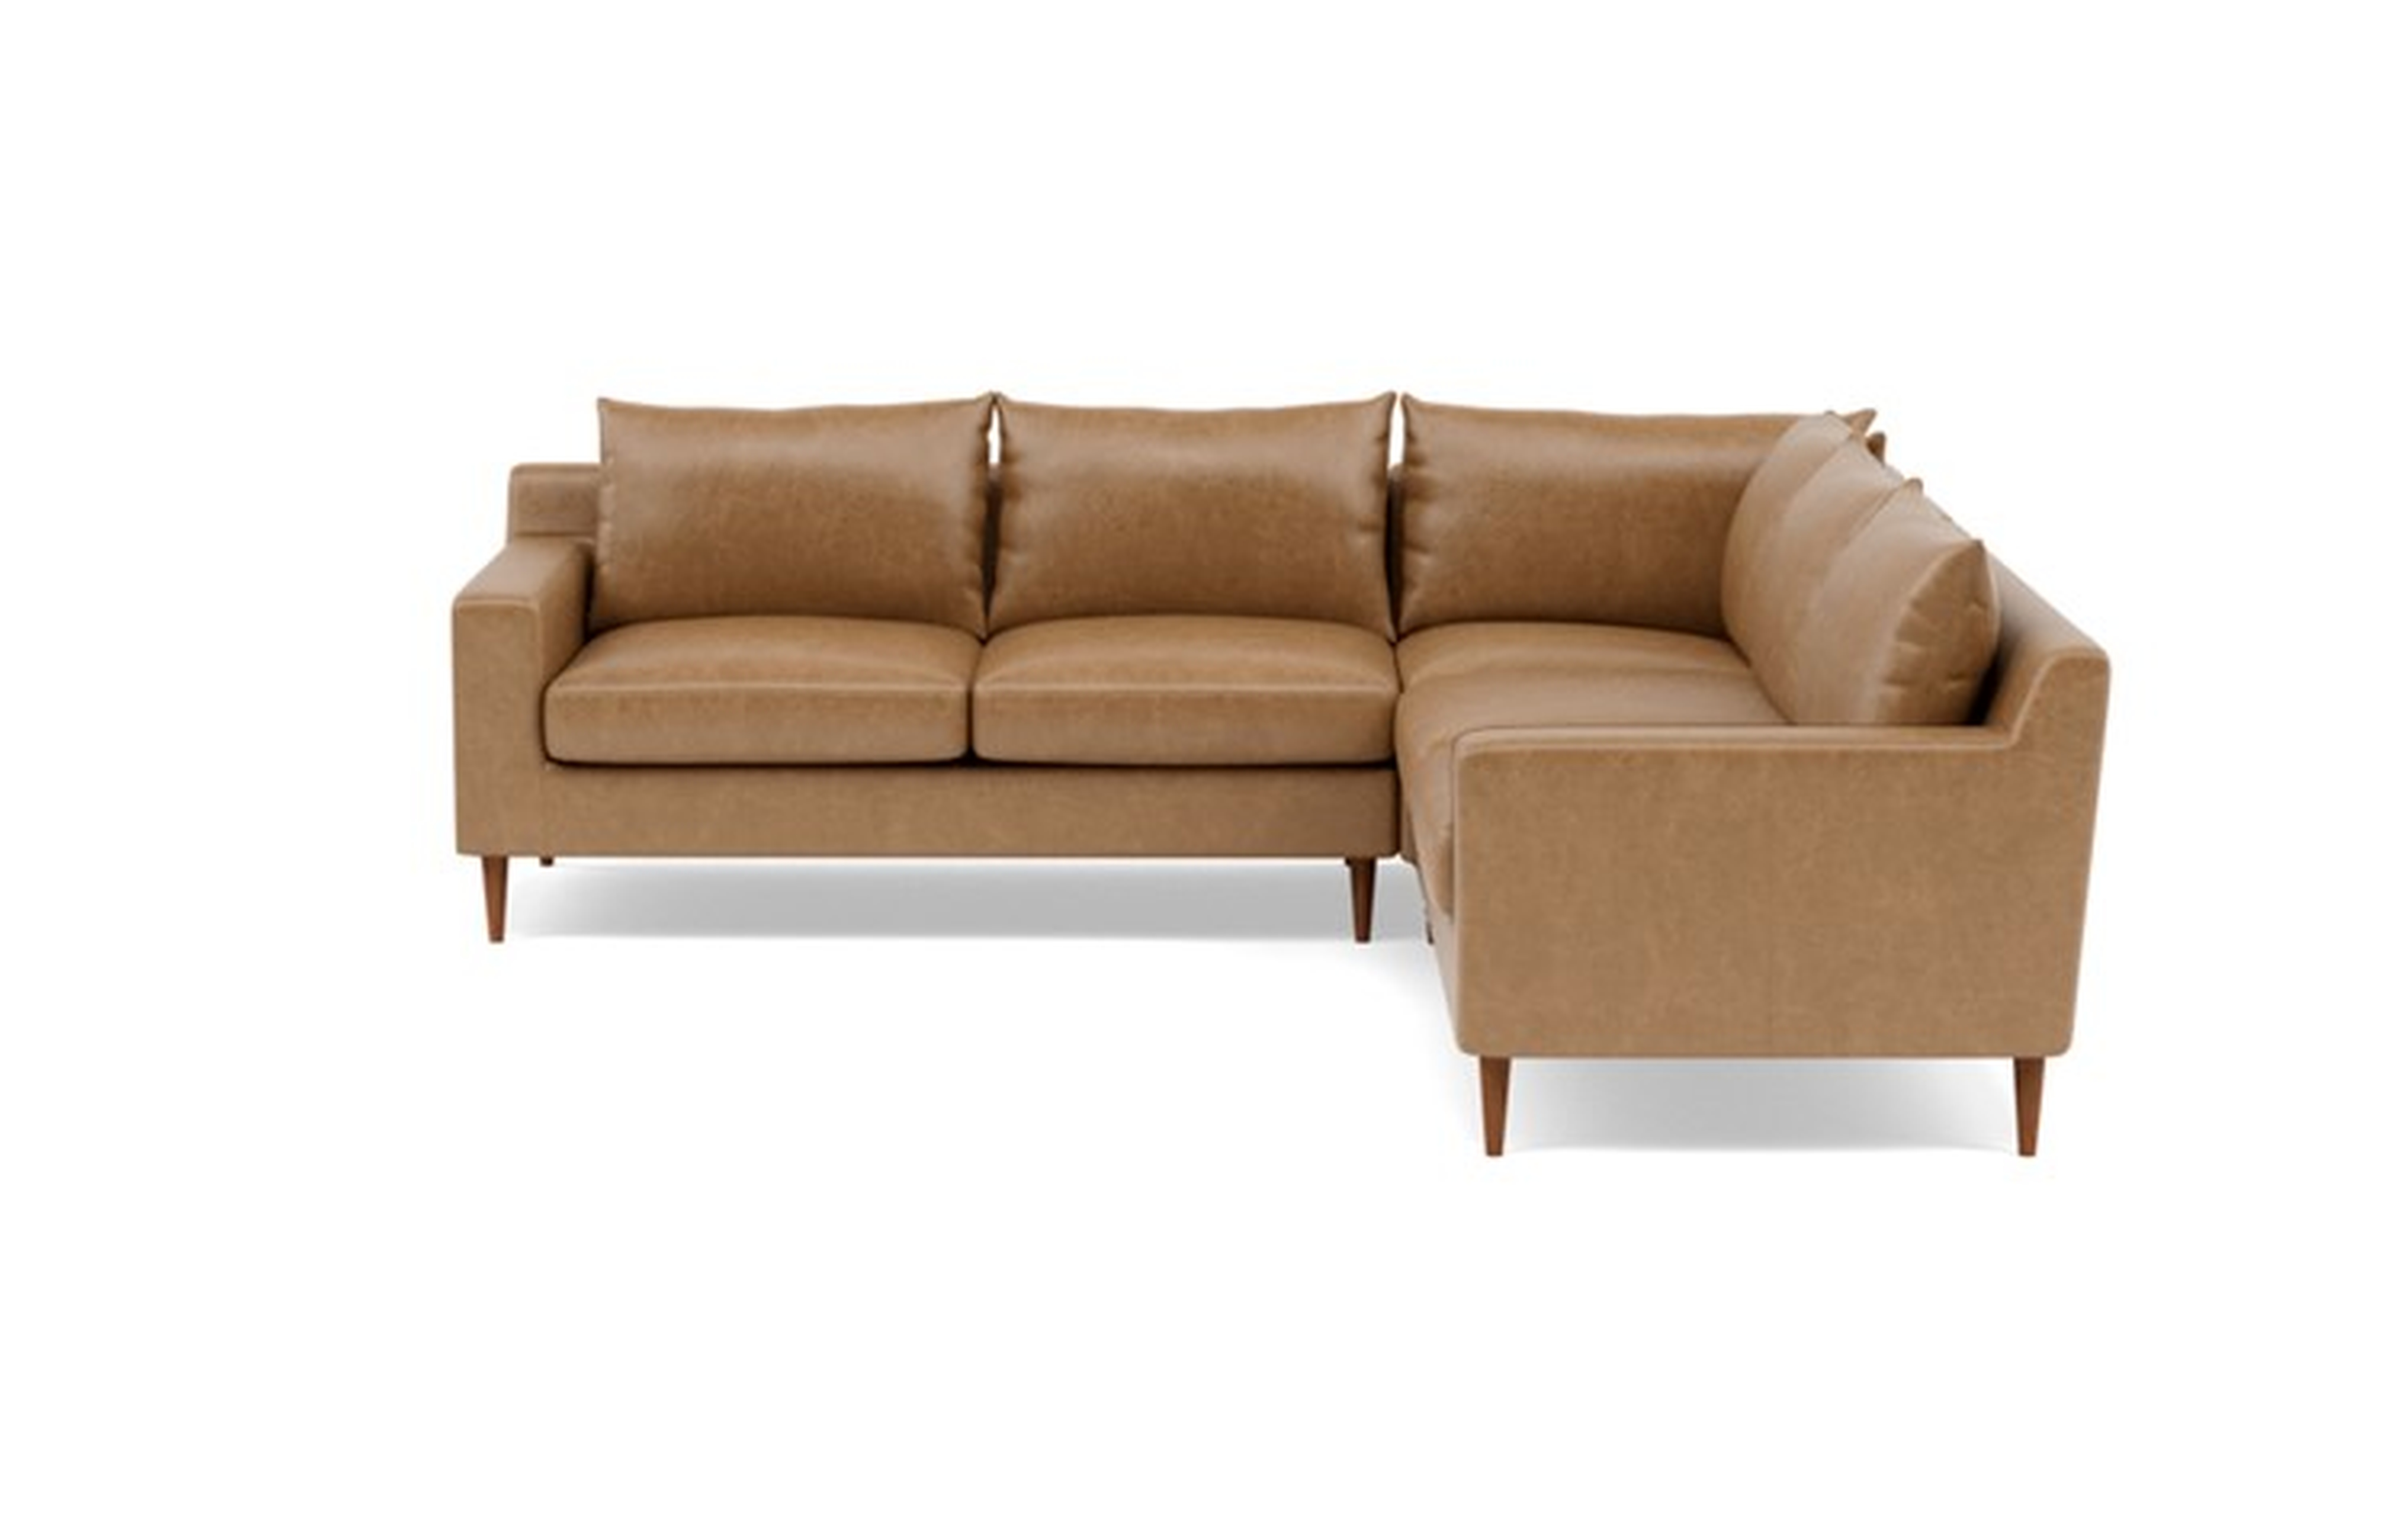 Sloan Leather Corner Sectional with Brown Palomino Leather, double down cushions, and Oiled Walnut legs - Interior Define